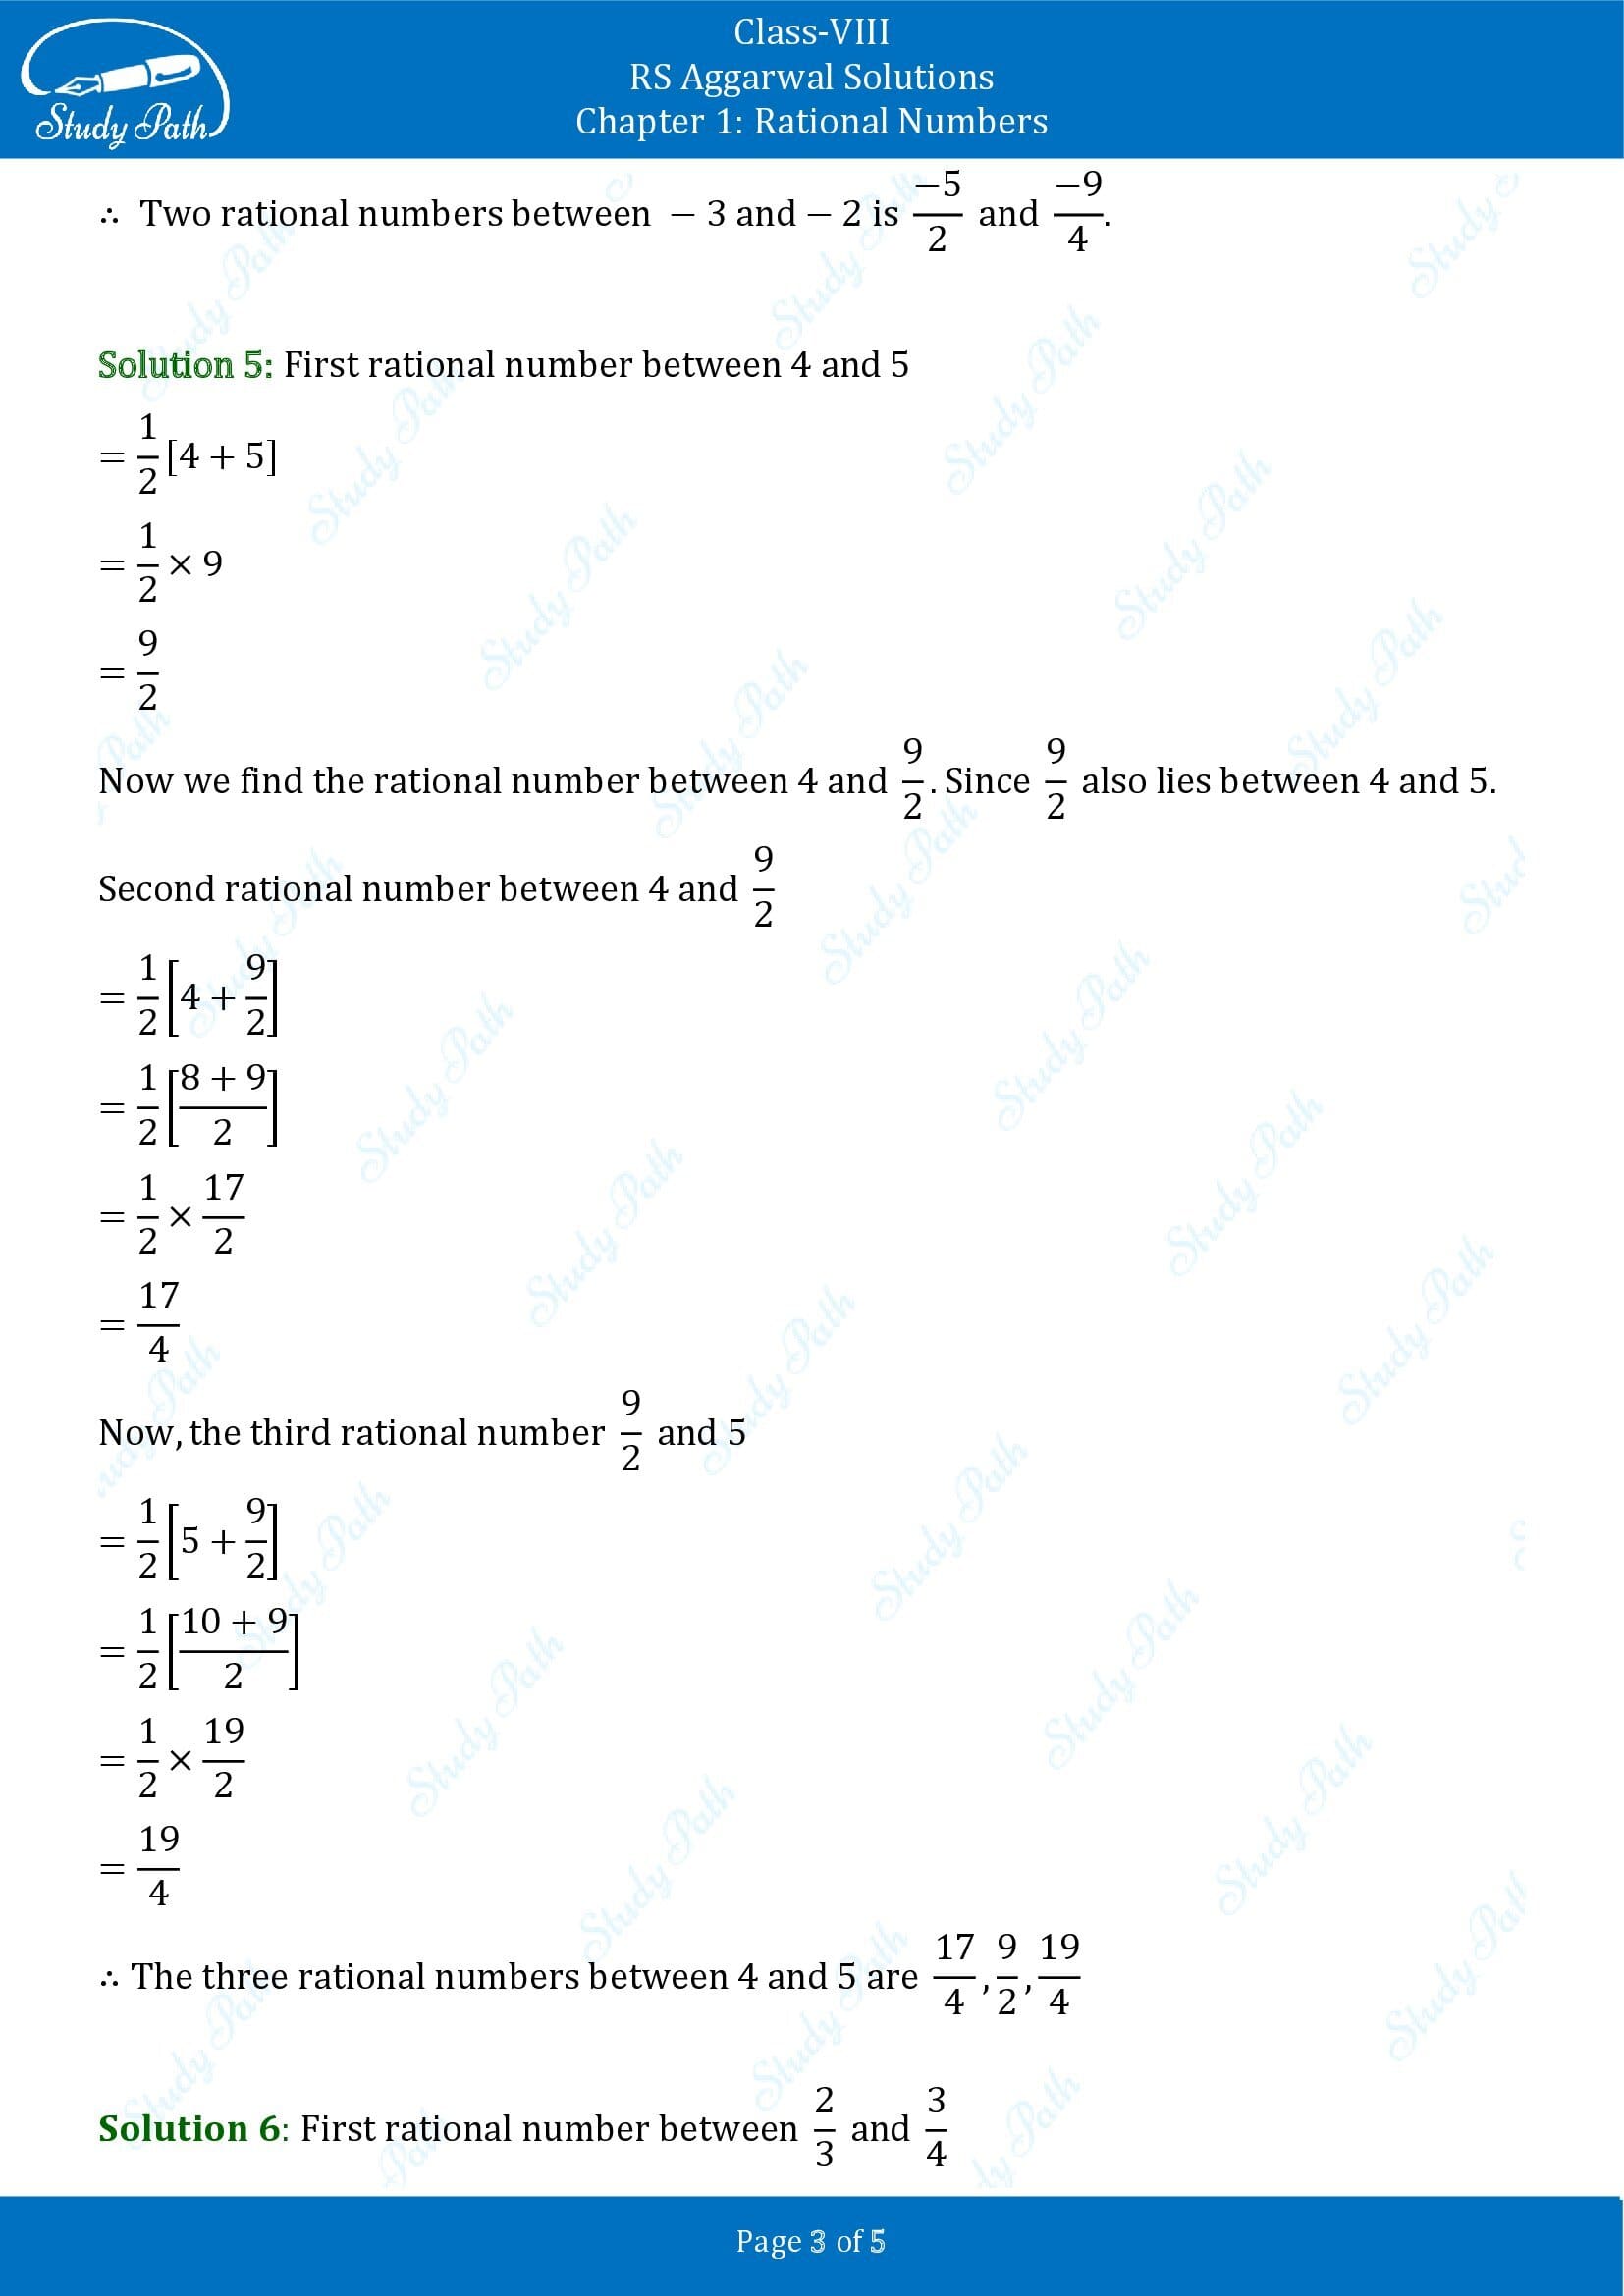 RS Aggarwal Solutions Class 8 Chapter 1 Rational Numbers Exercise 1F 00003